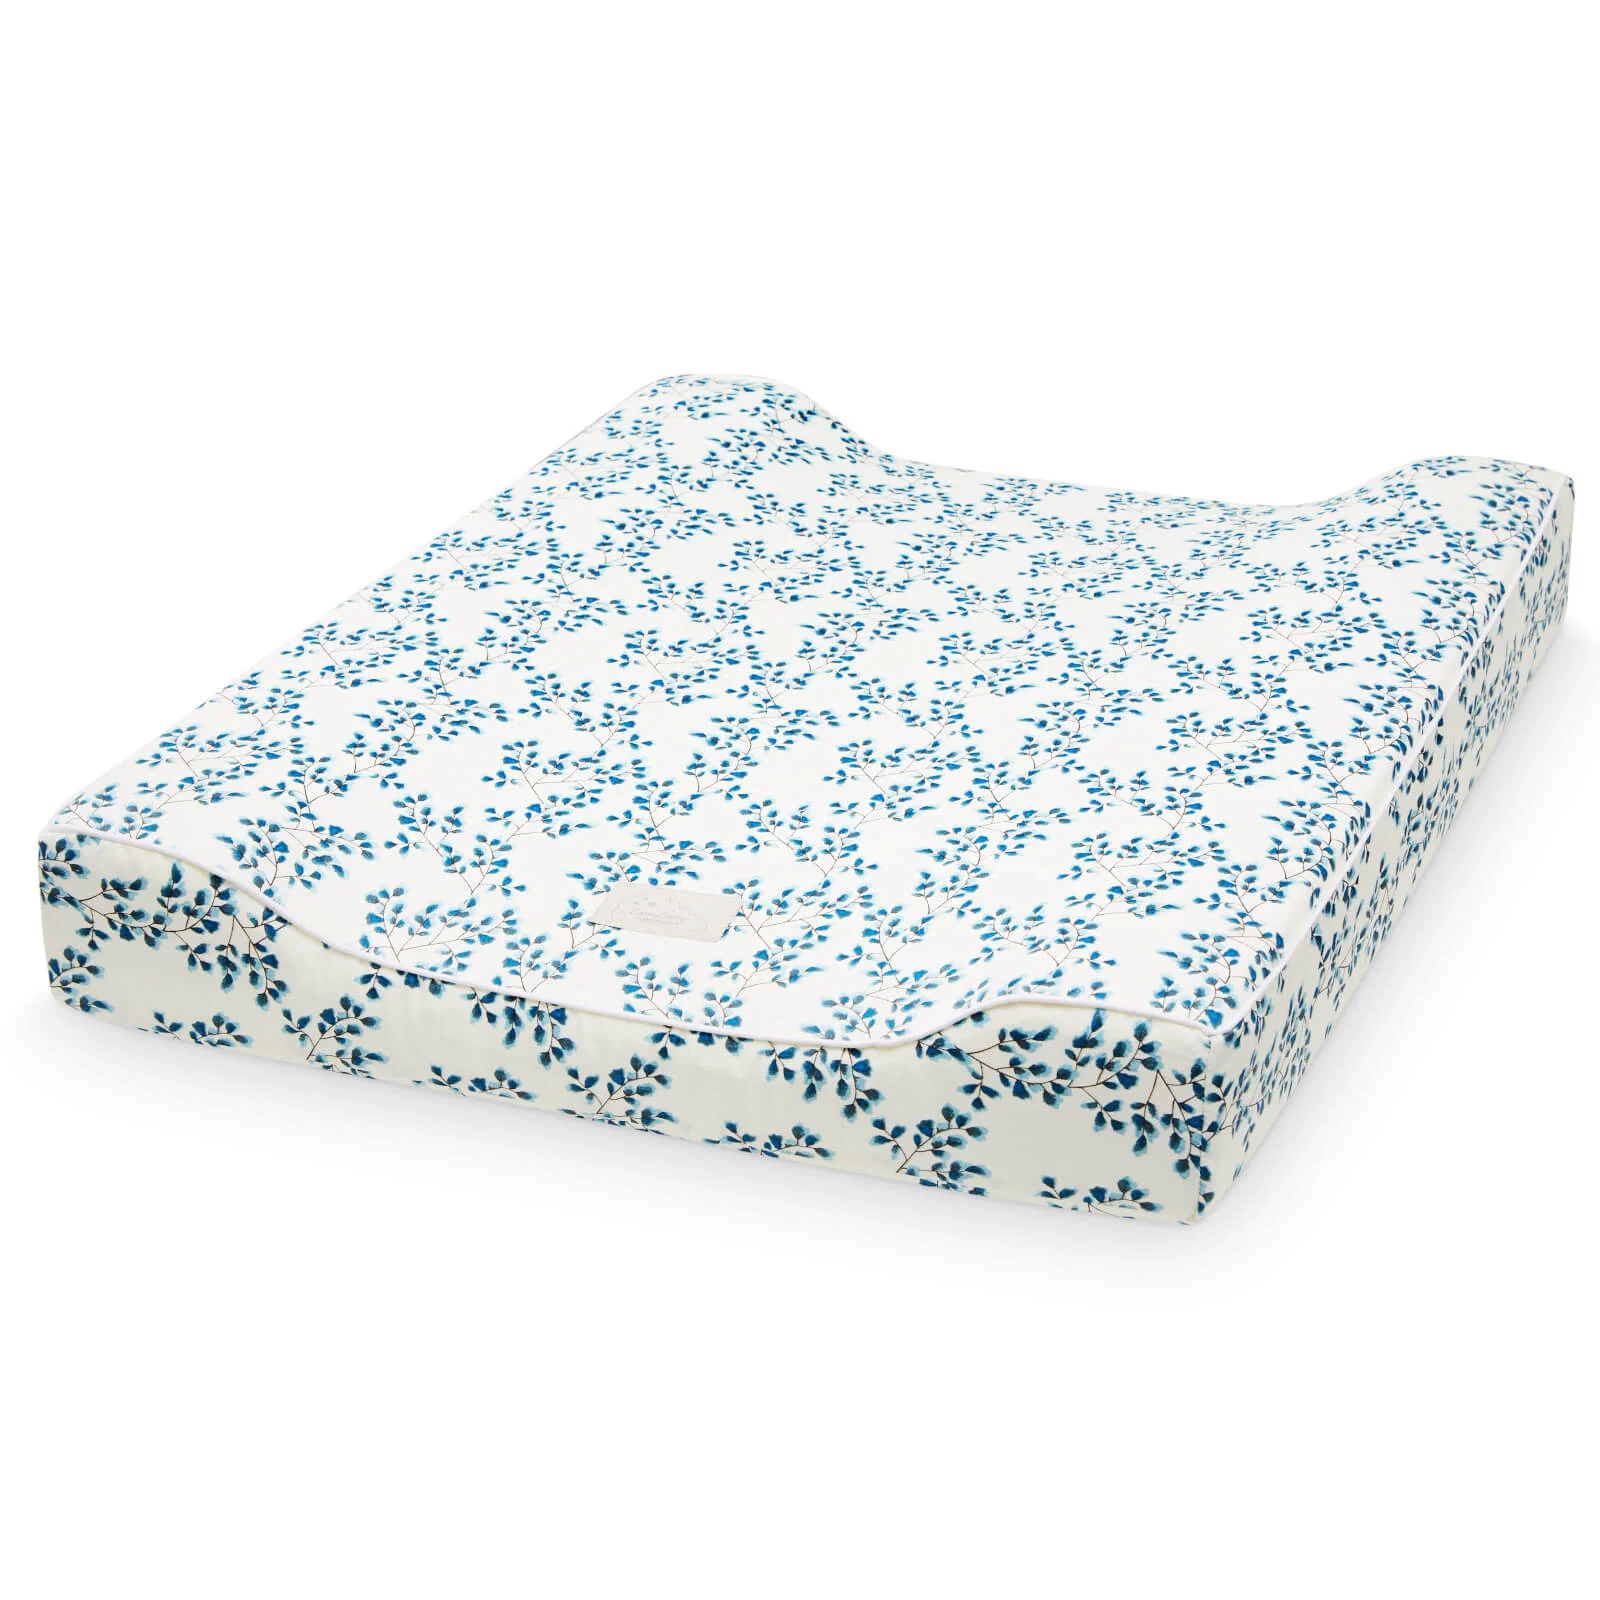 Cam Cam Changing Cushion with Lining - Fiori Image 1